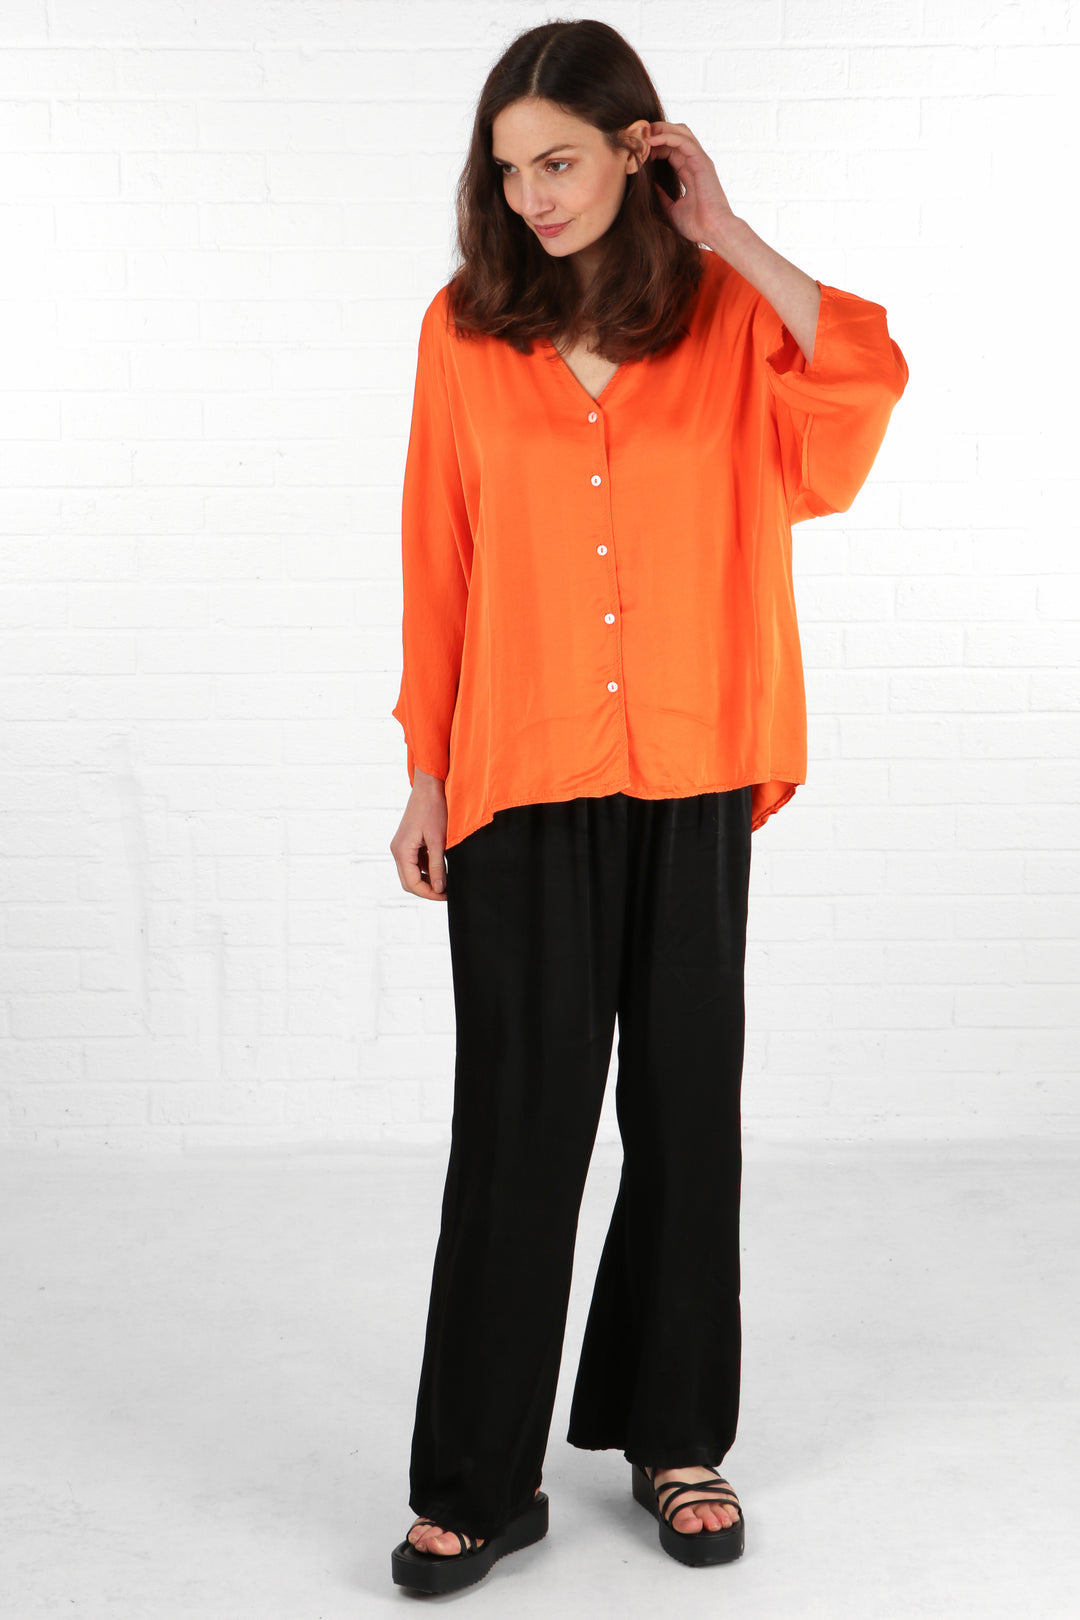 model wearing a loose fitting orange silky textured blouse